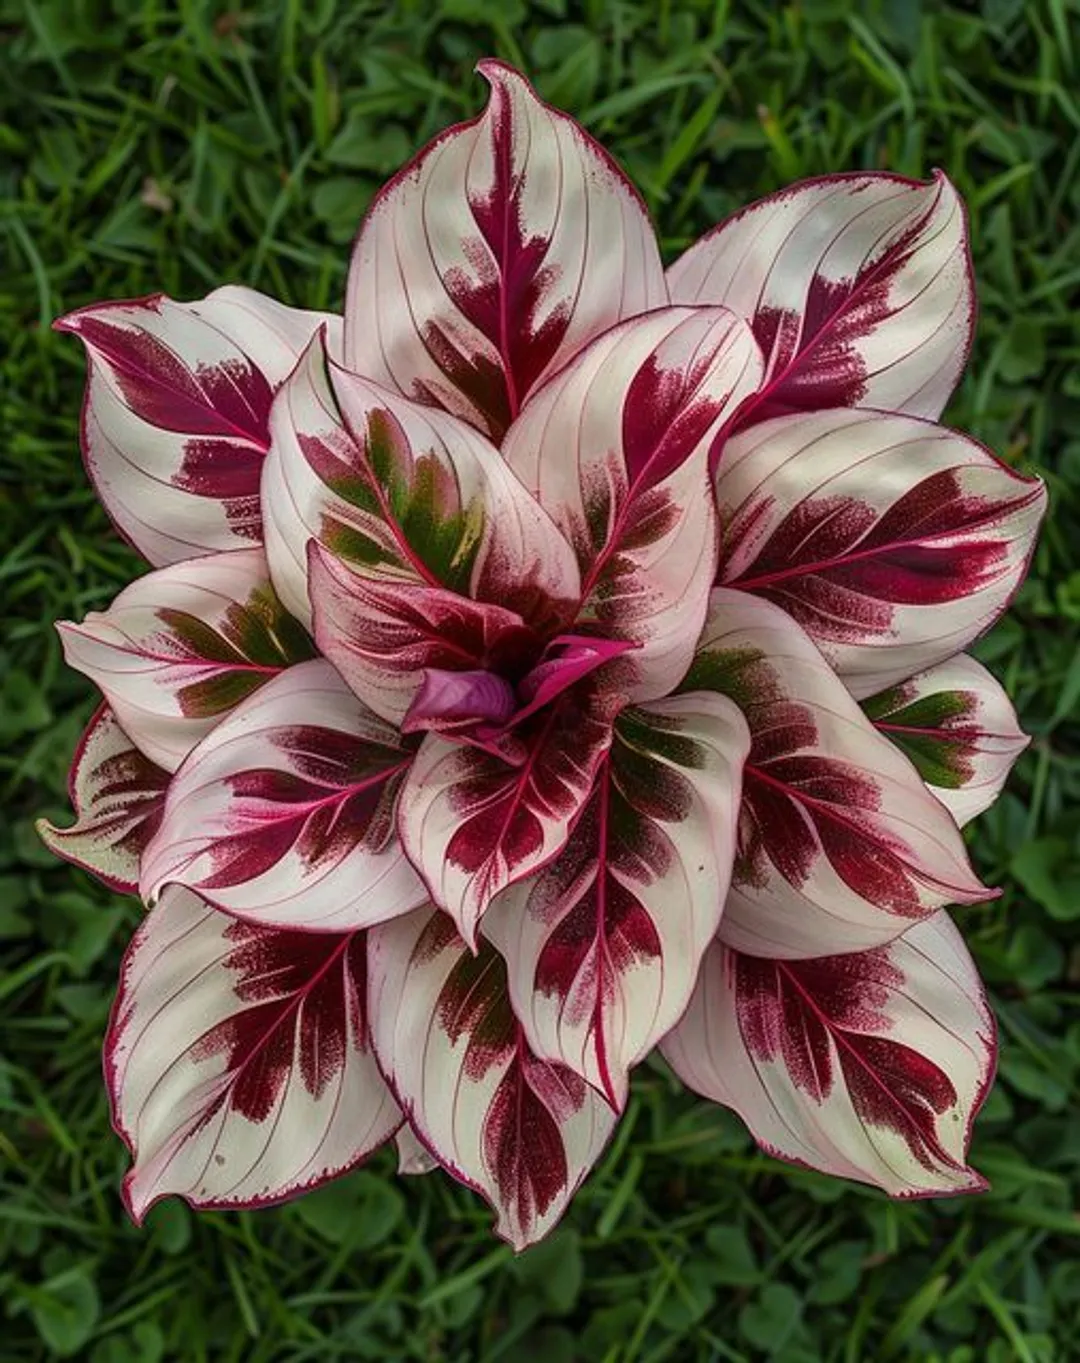 Crimson Red Calathea Couture 25 seeds per pack recomended - $12.40